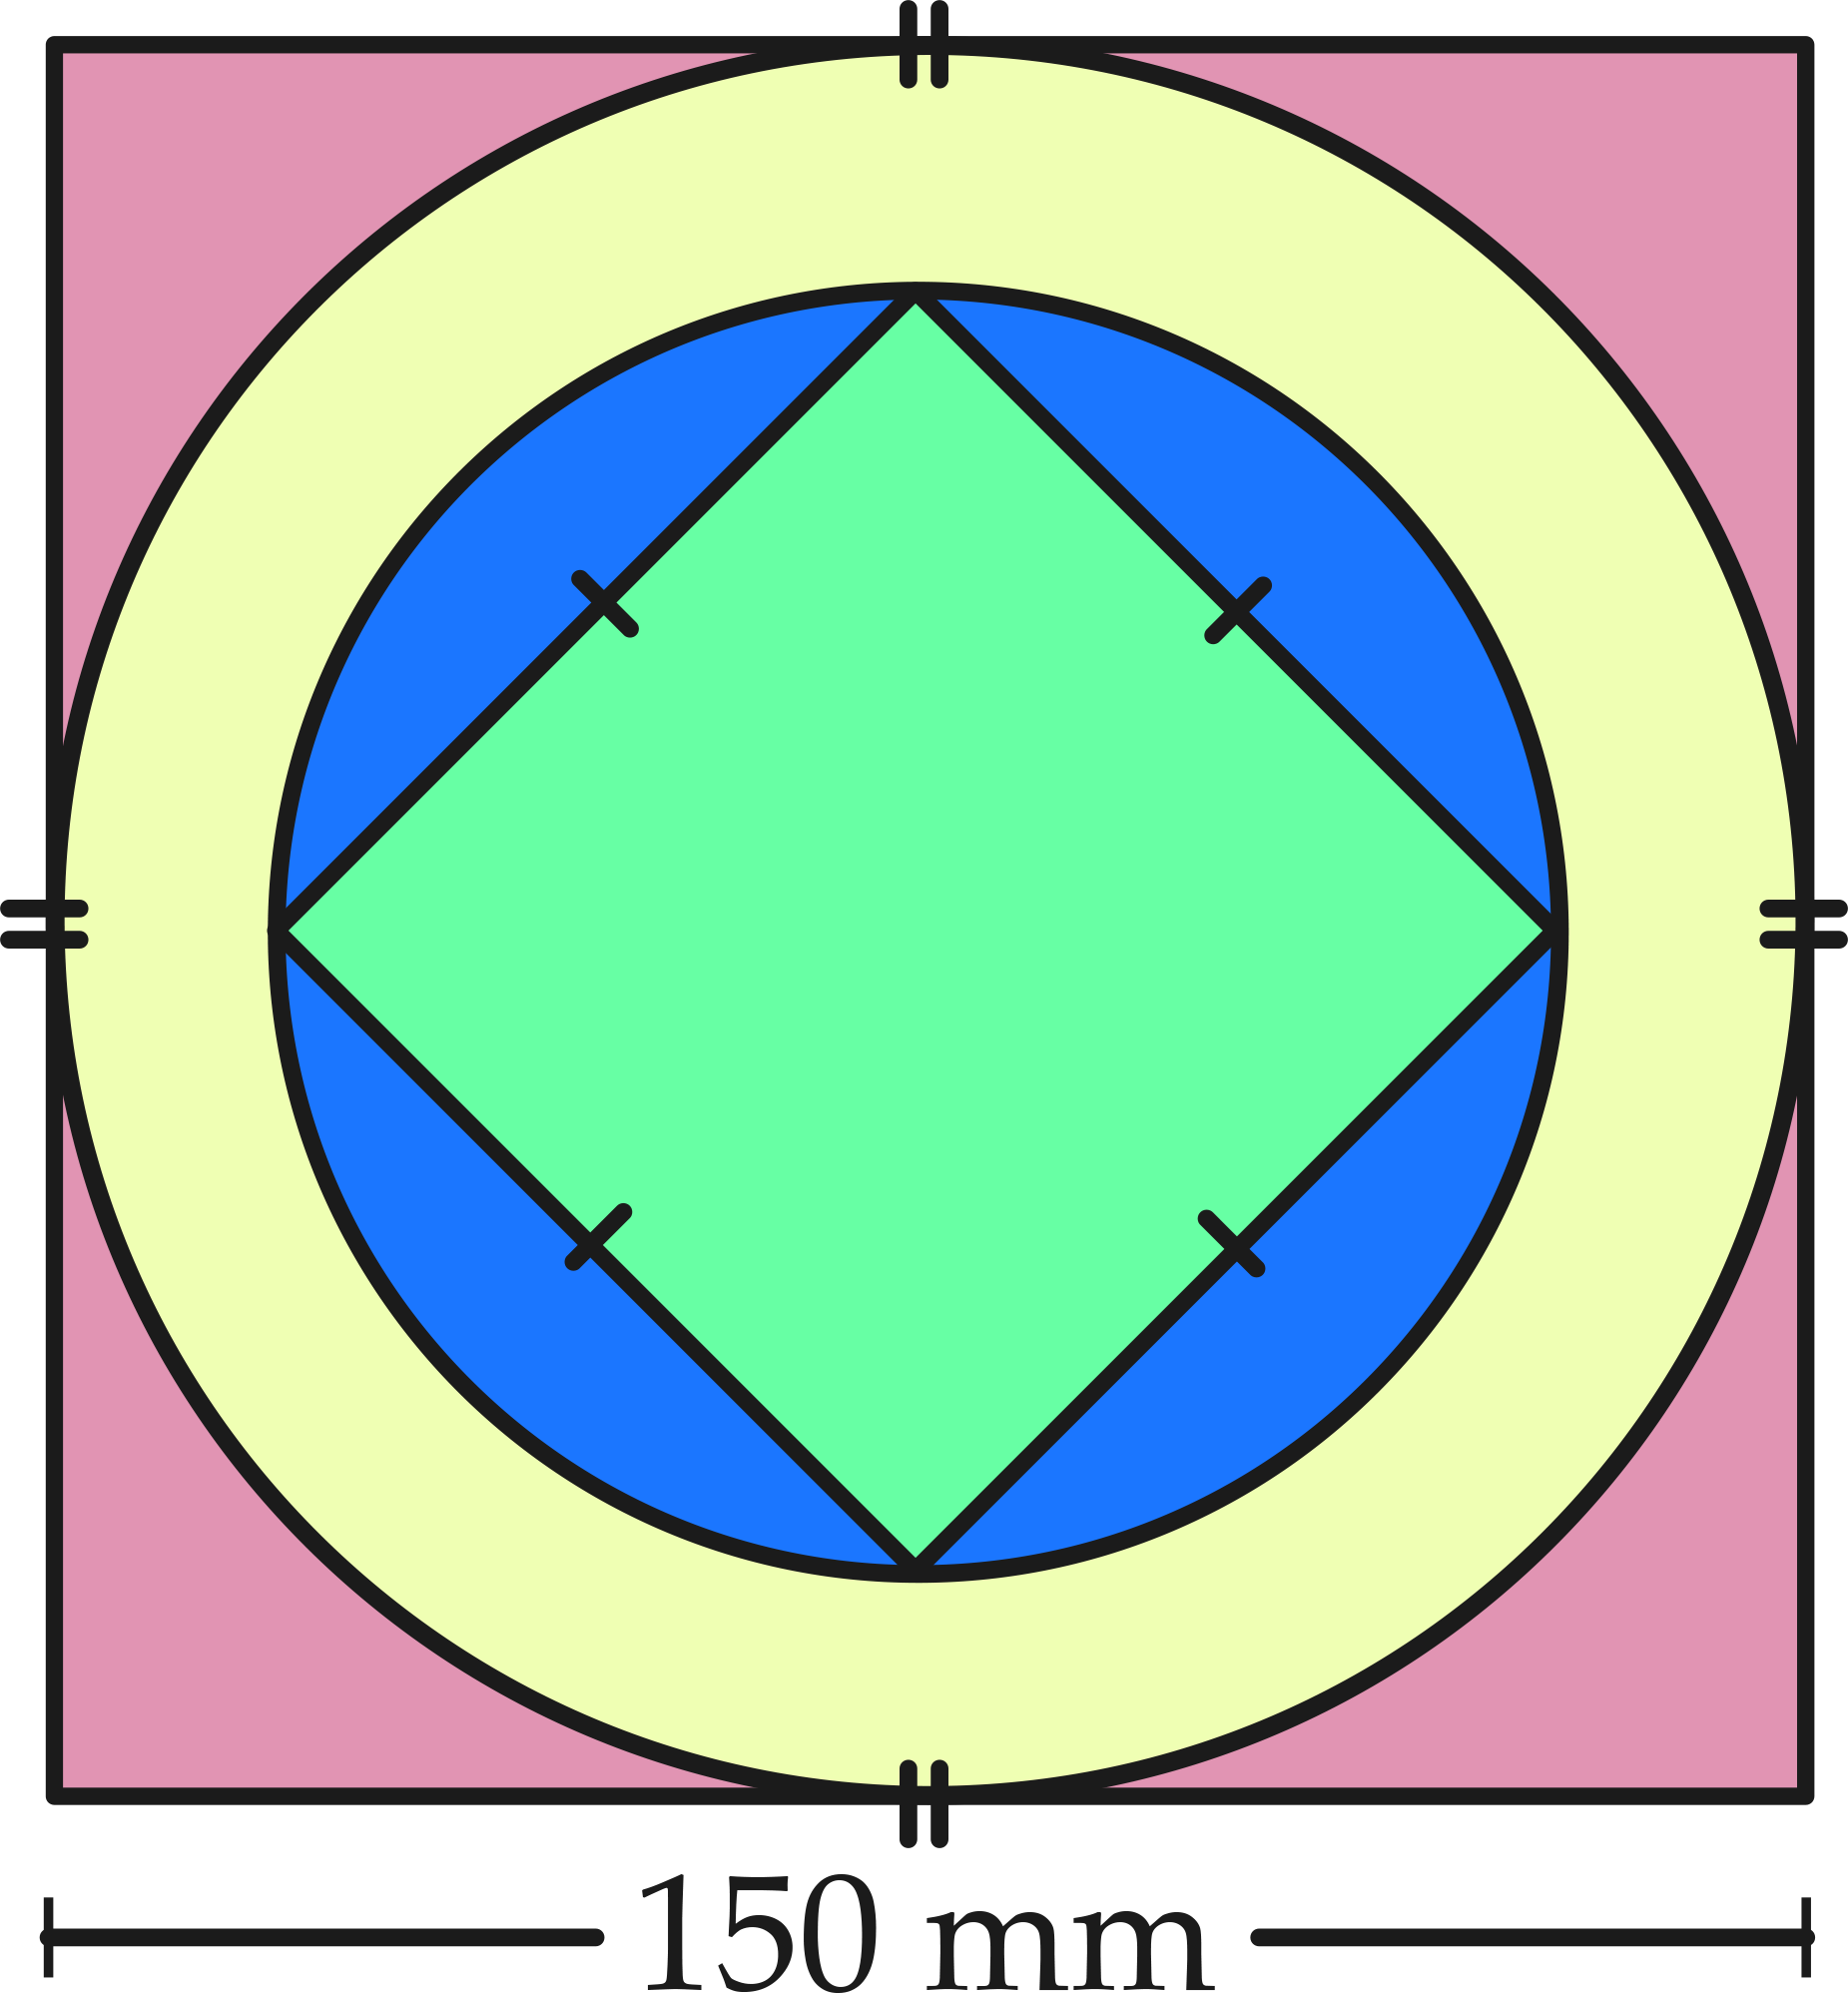 The design for the quilting square.